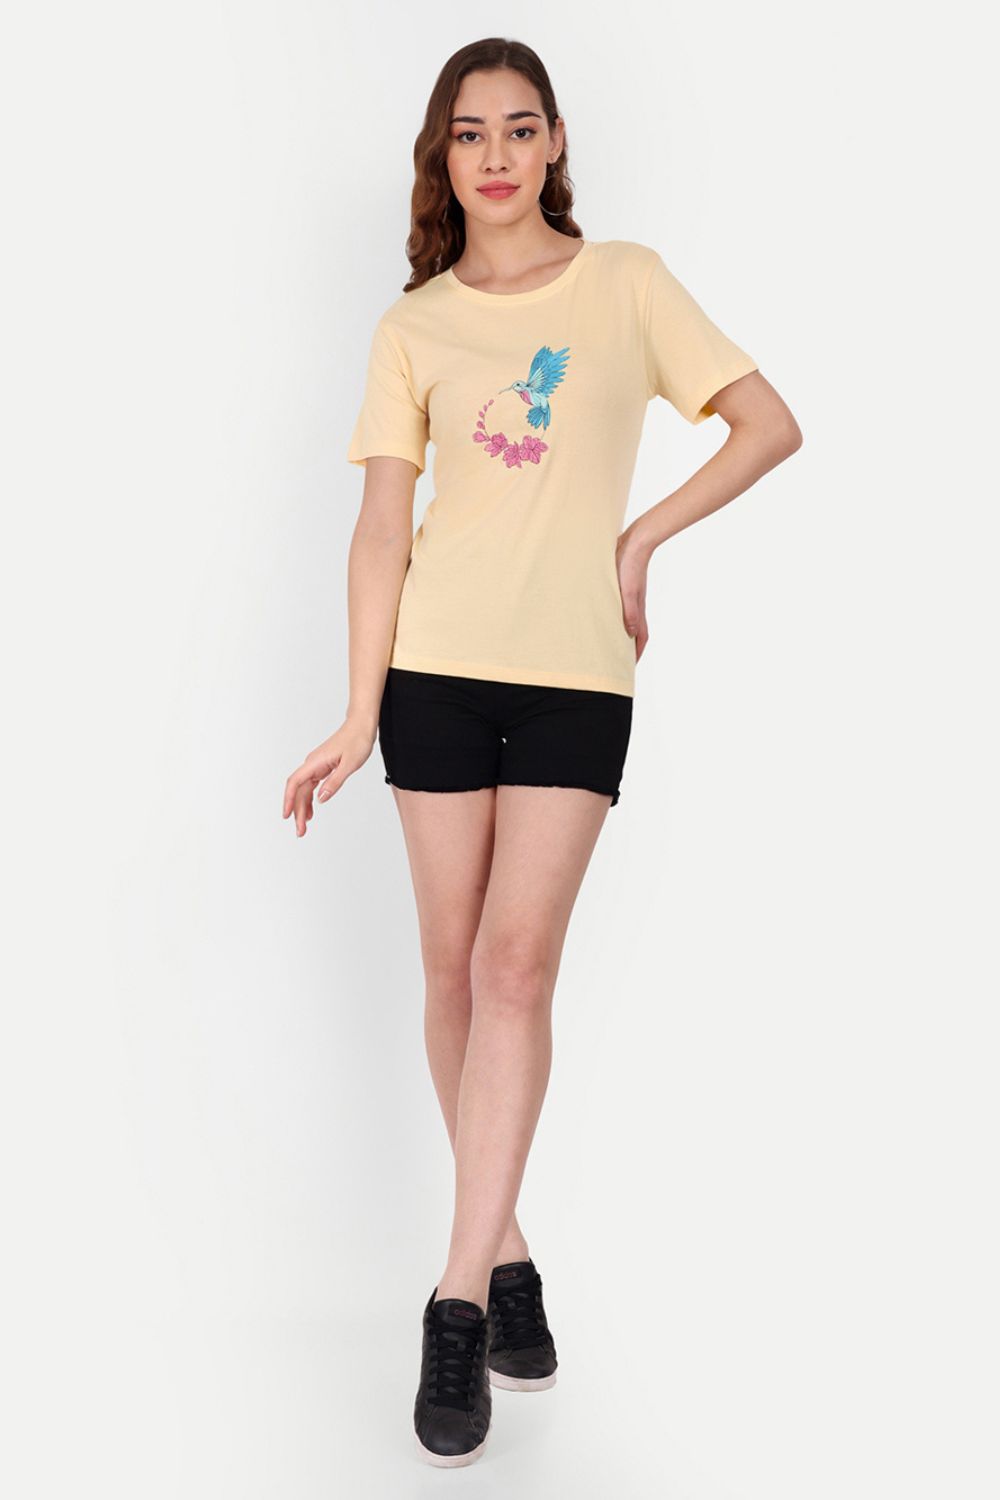 Bird  and Flower Embroidery T-Shirt